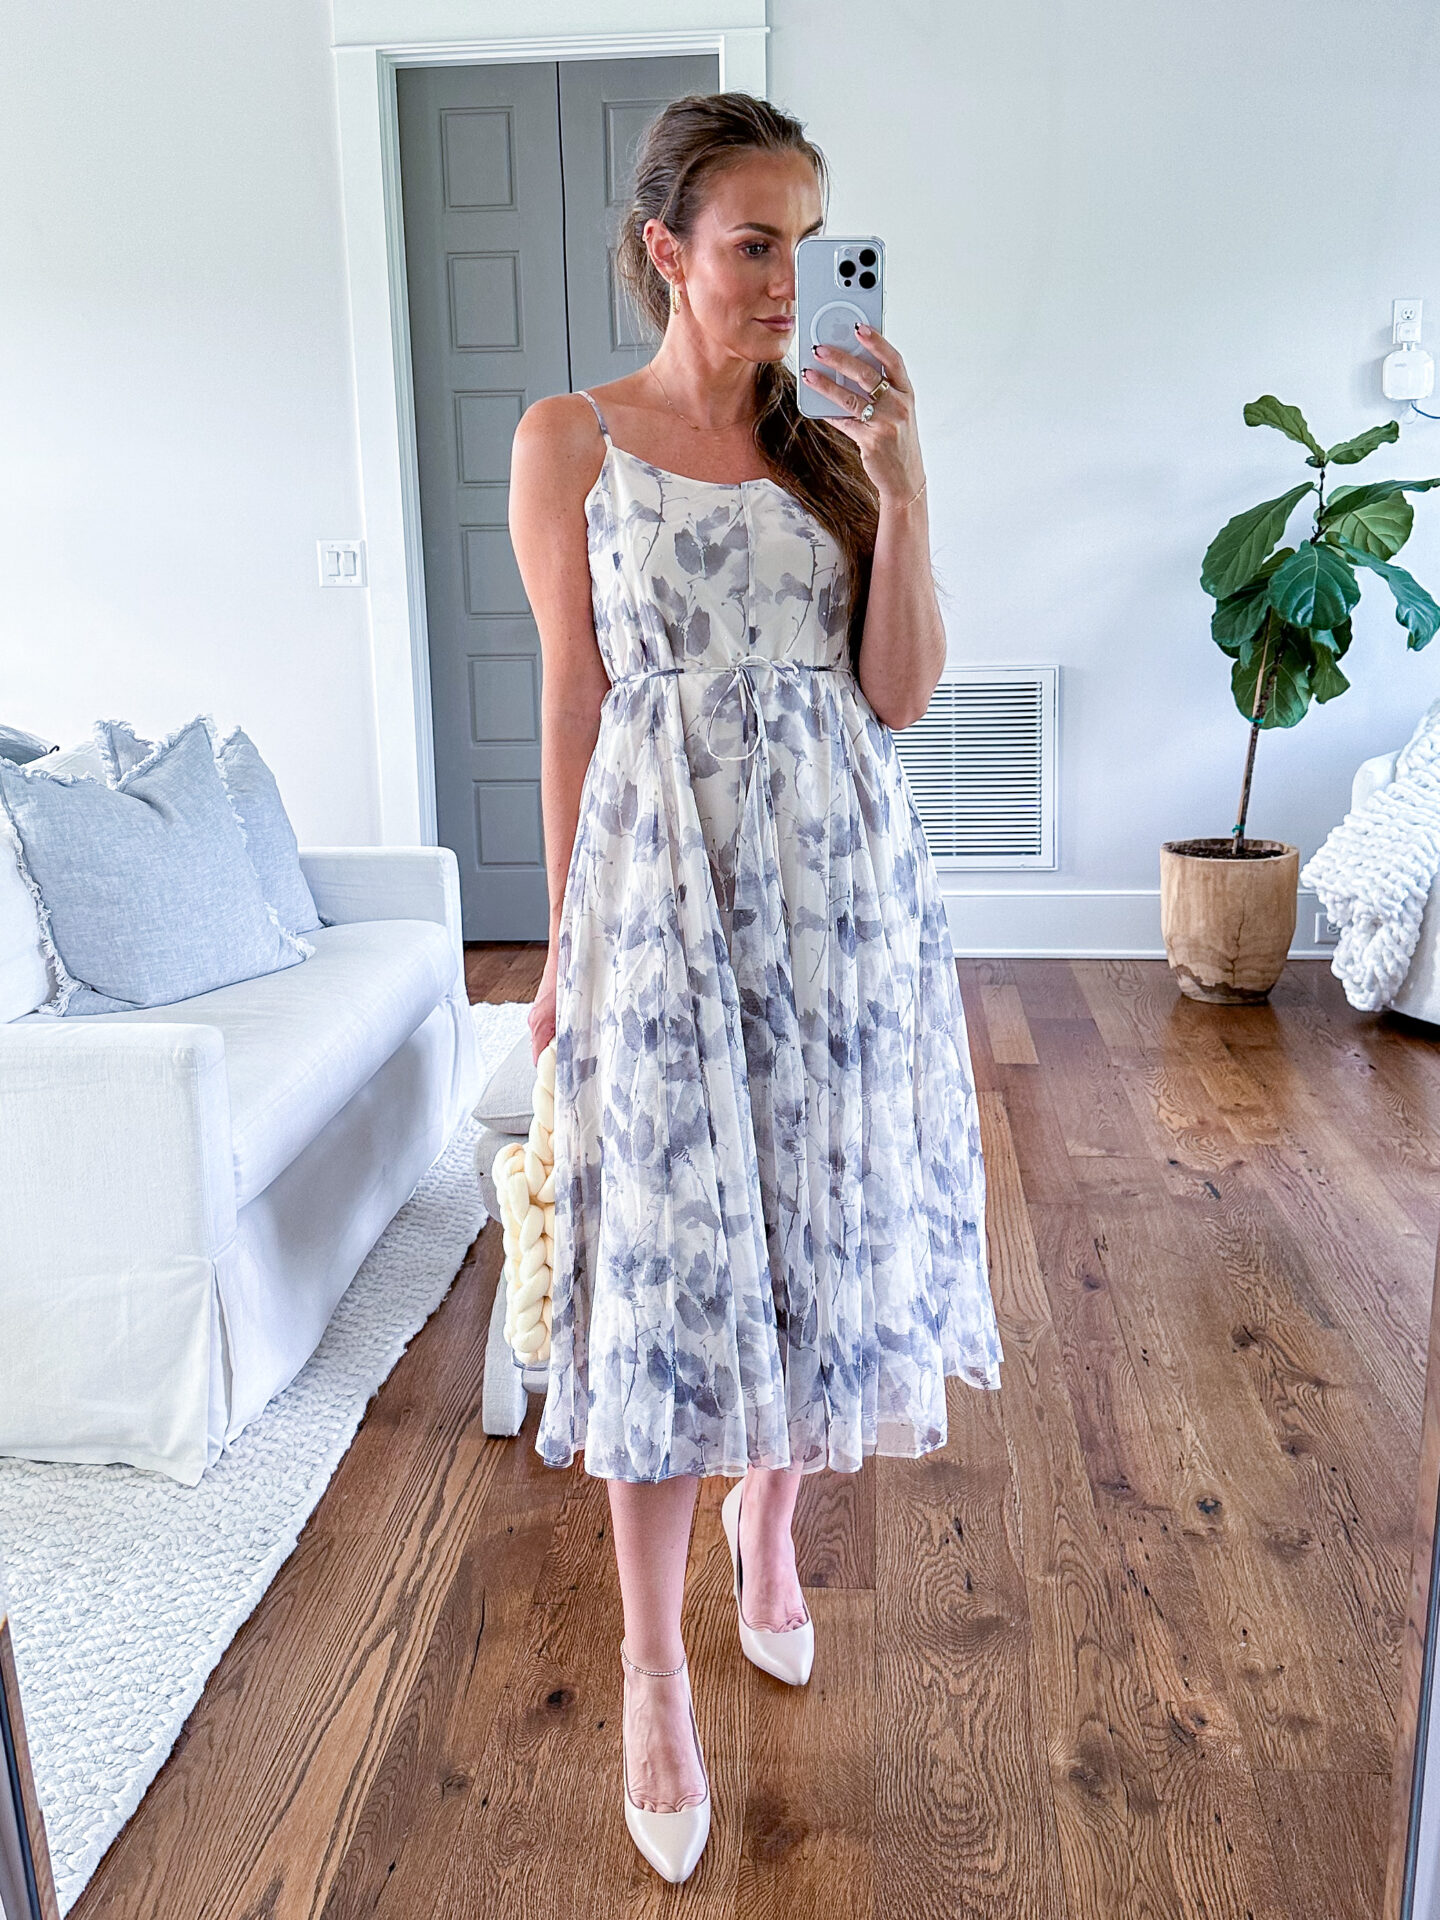 outfit planning by fashion blogger Angela Lanter